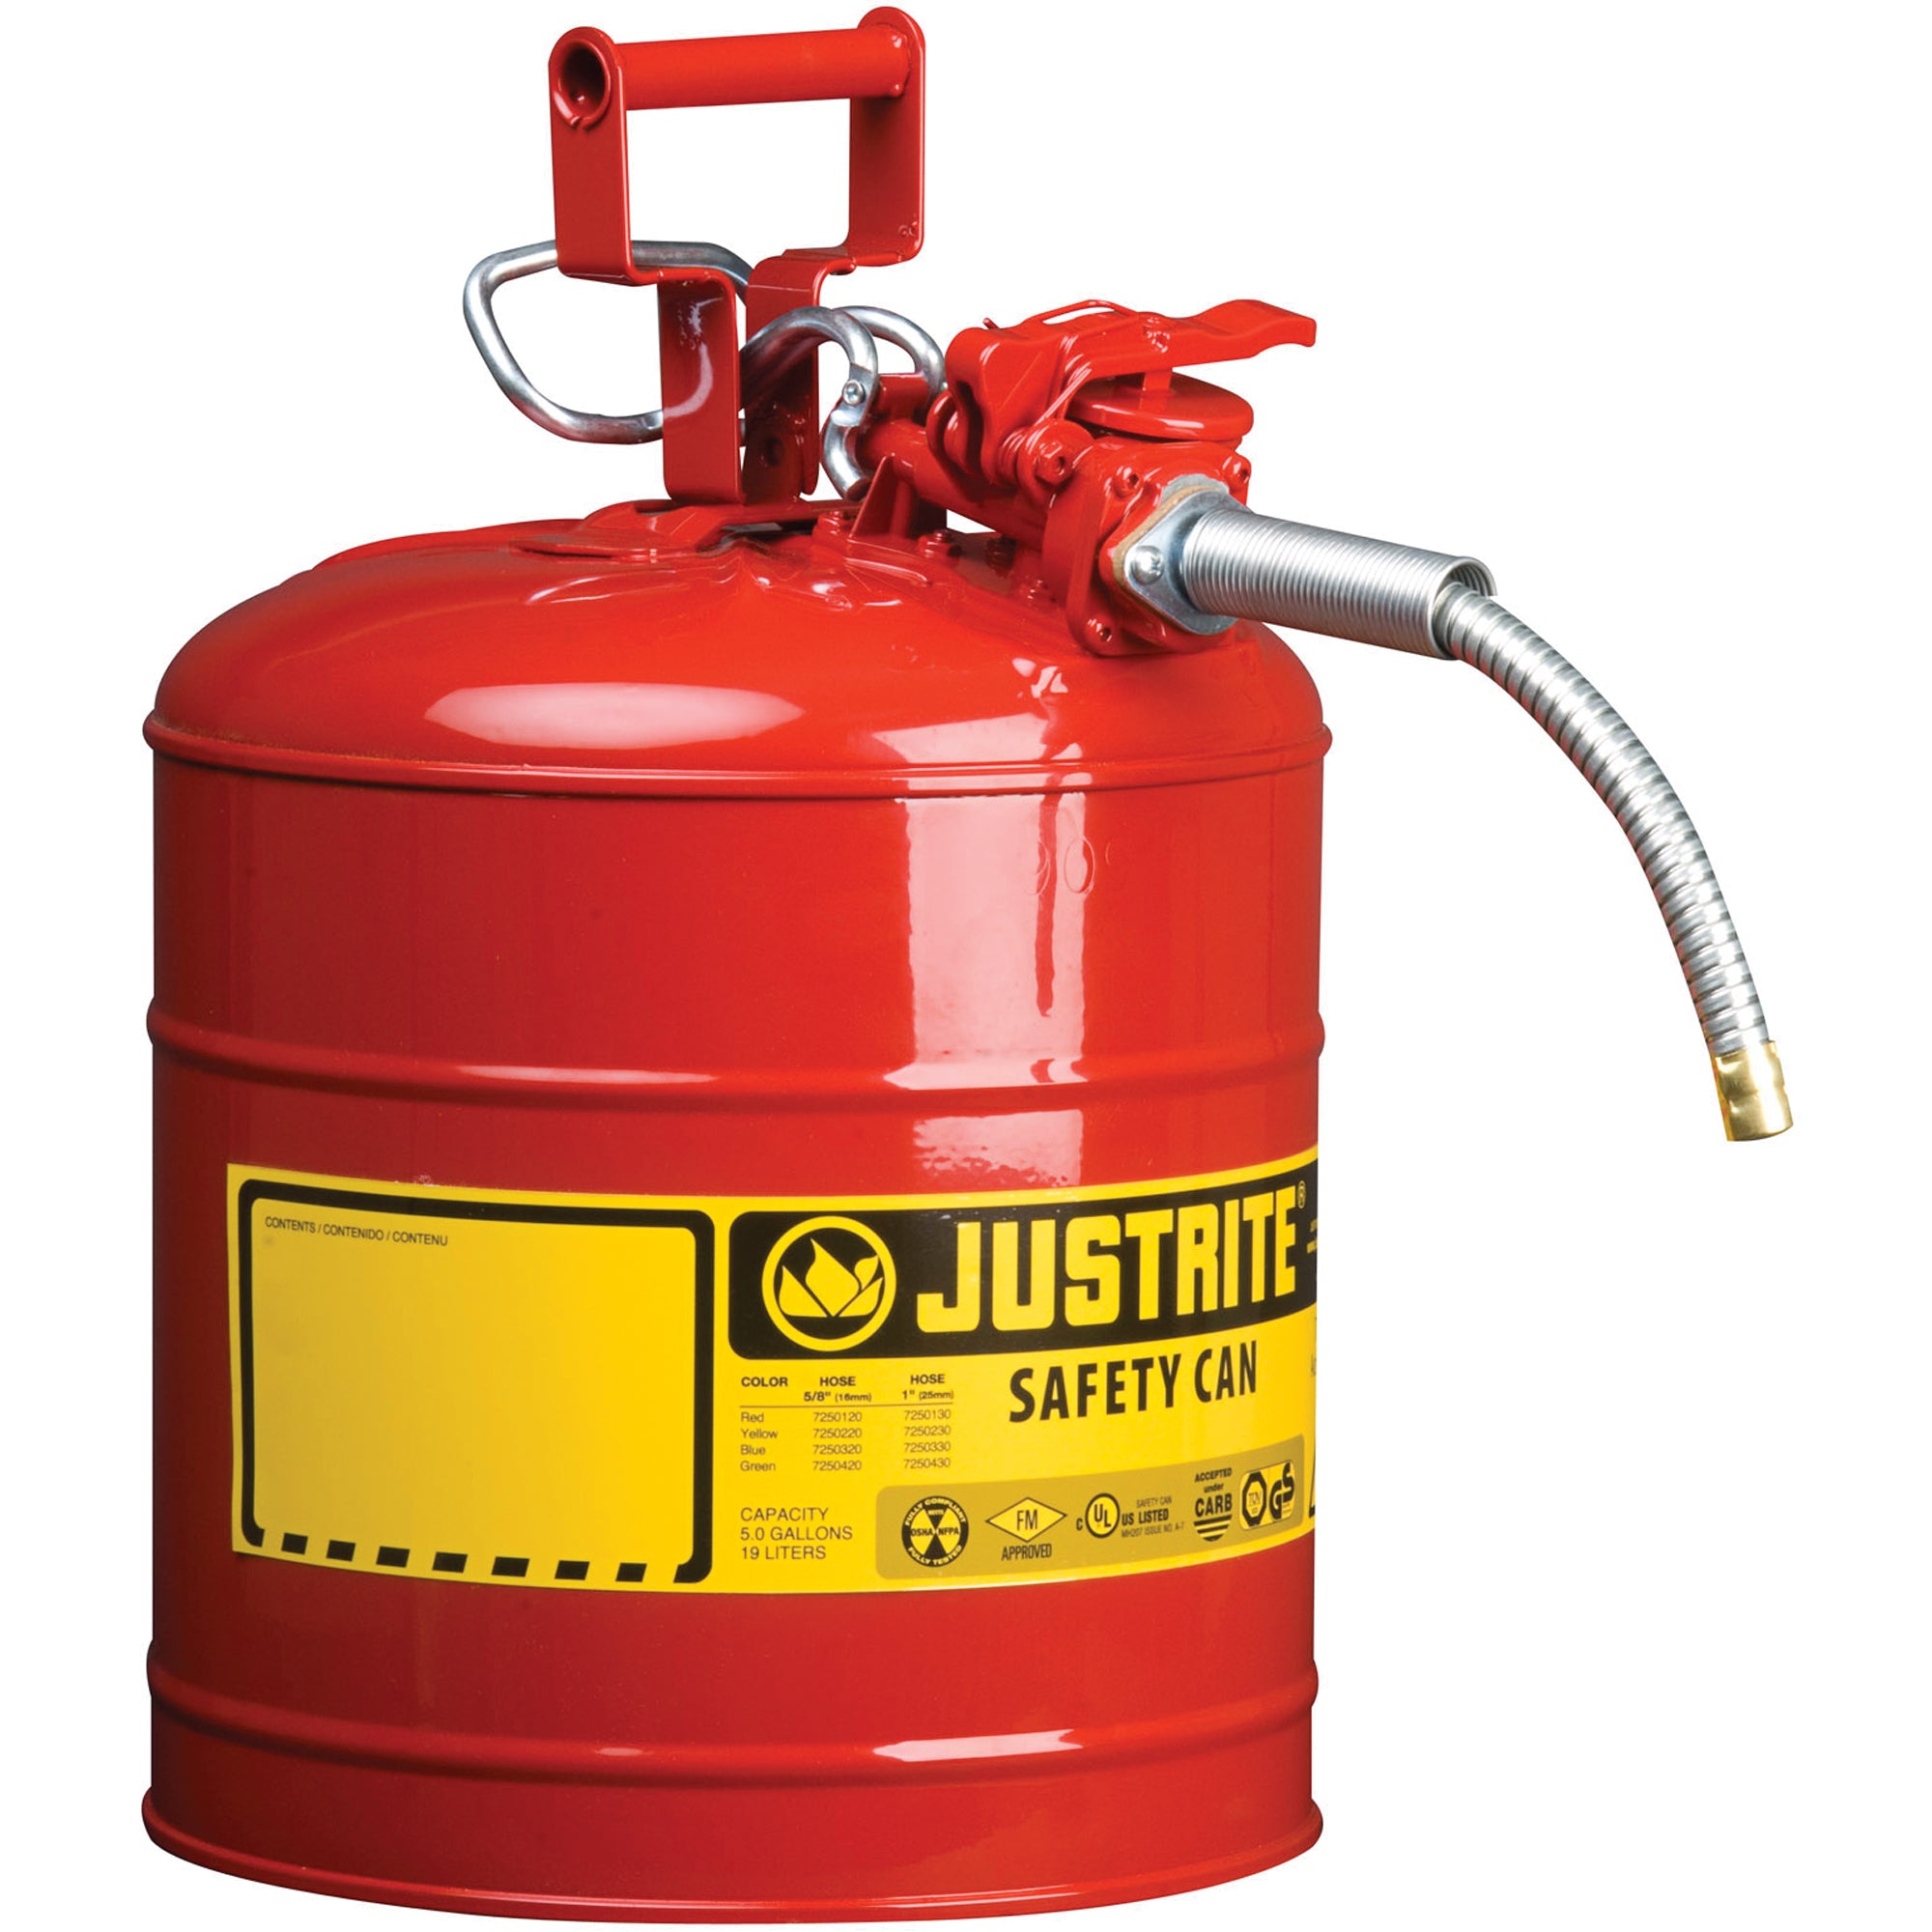 Justrite 7250120 AccuFlow™ Safety Cans, Type II, Steel, 5 US gal., Red, FM Approved/UL/ULC Listed